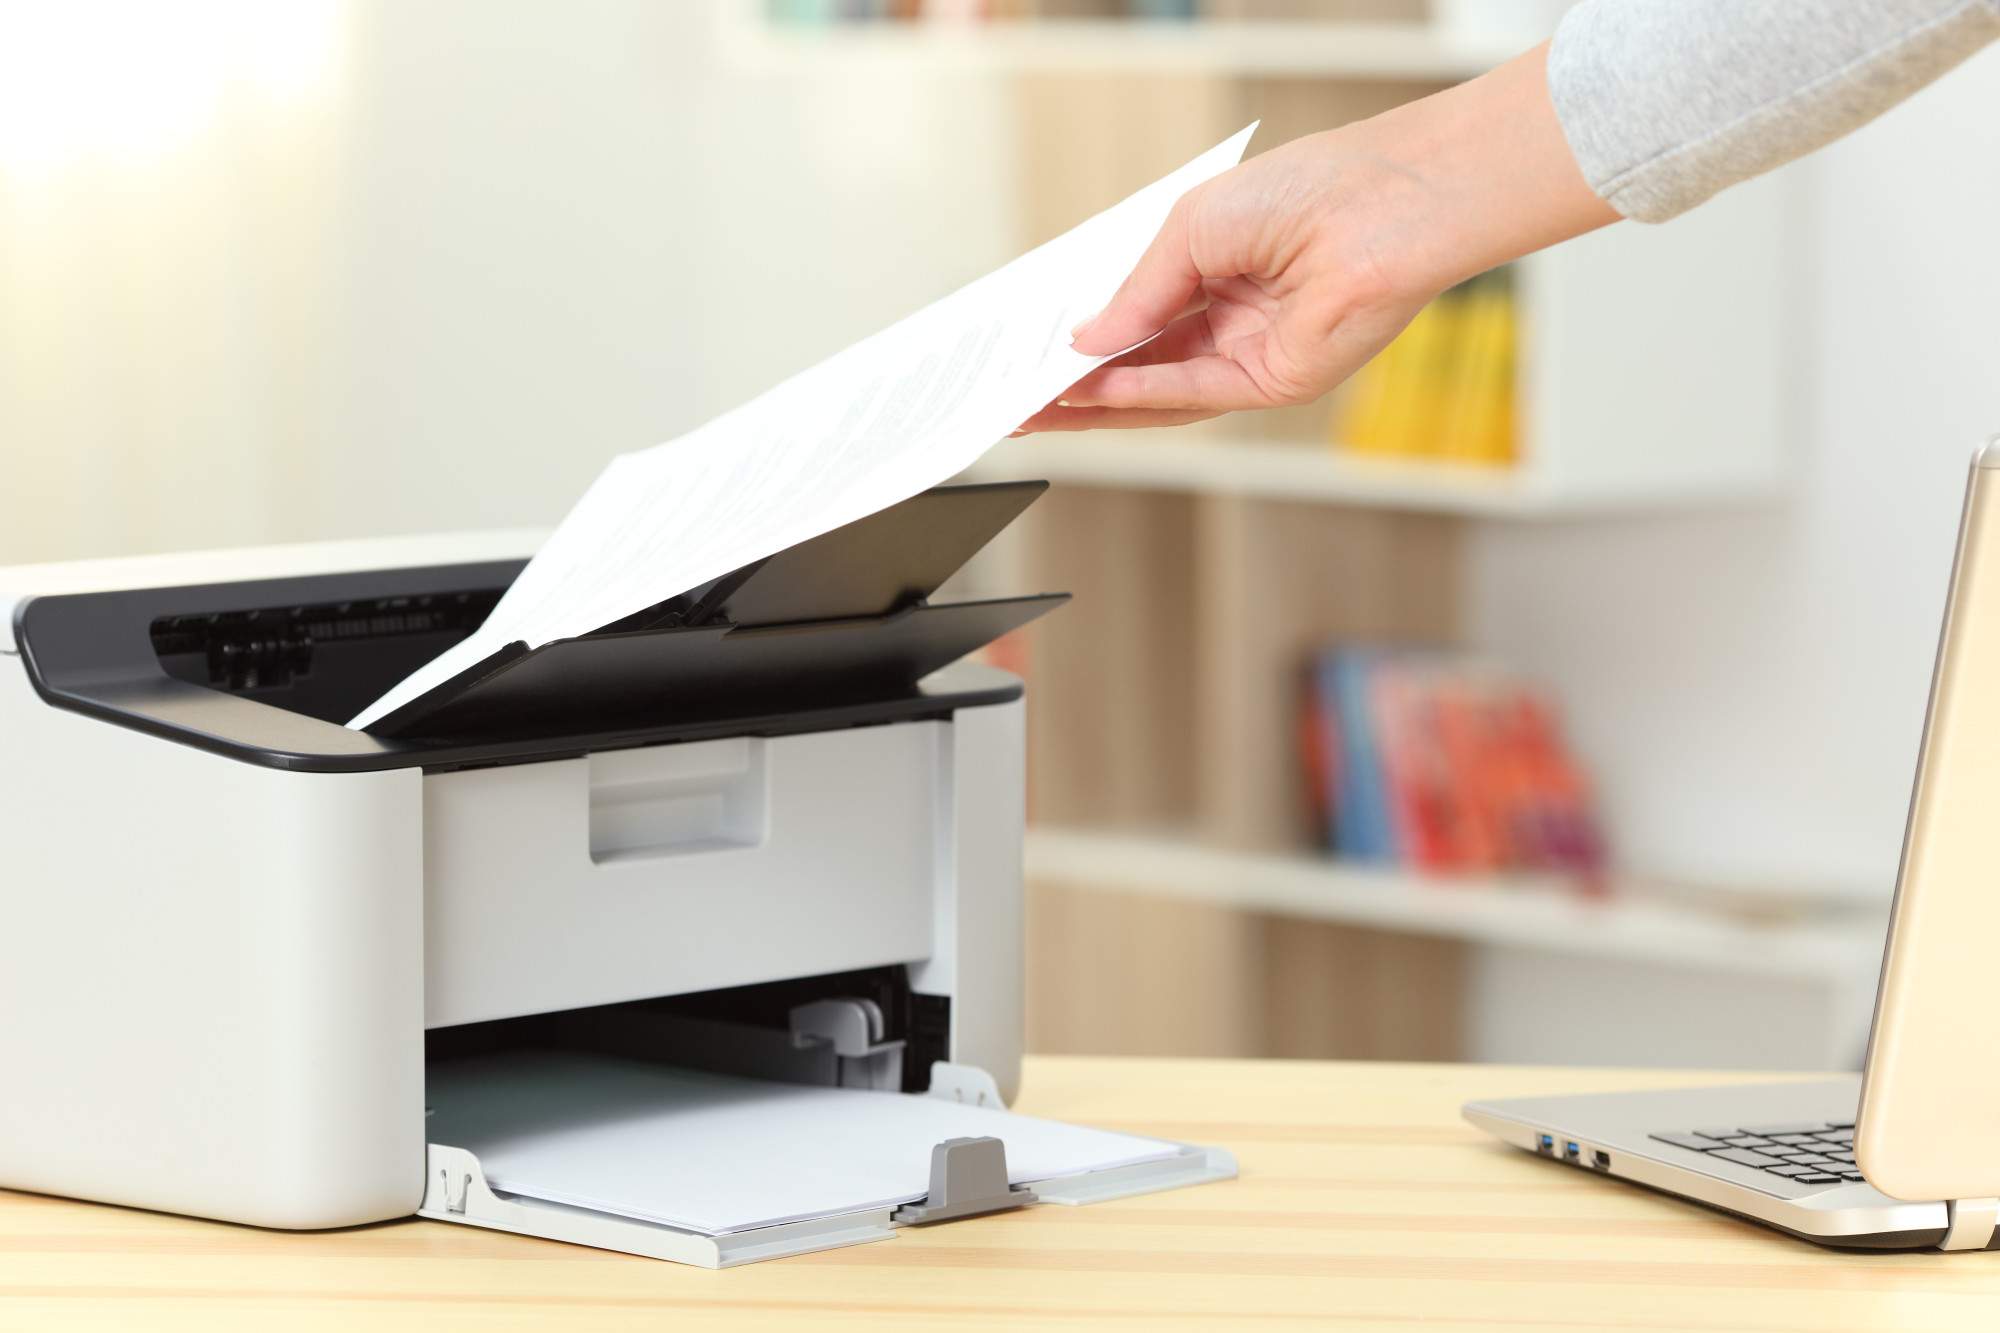 The Brief Guide That Makes Choosing the Best Printer Simple